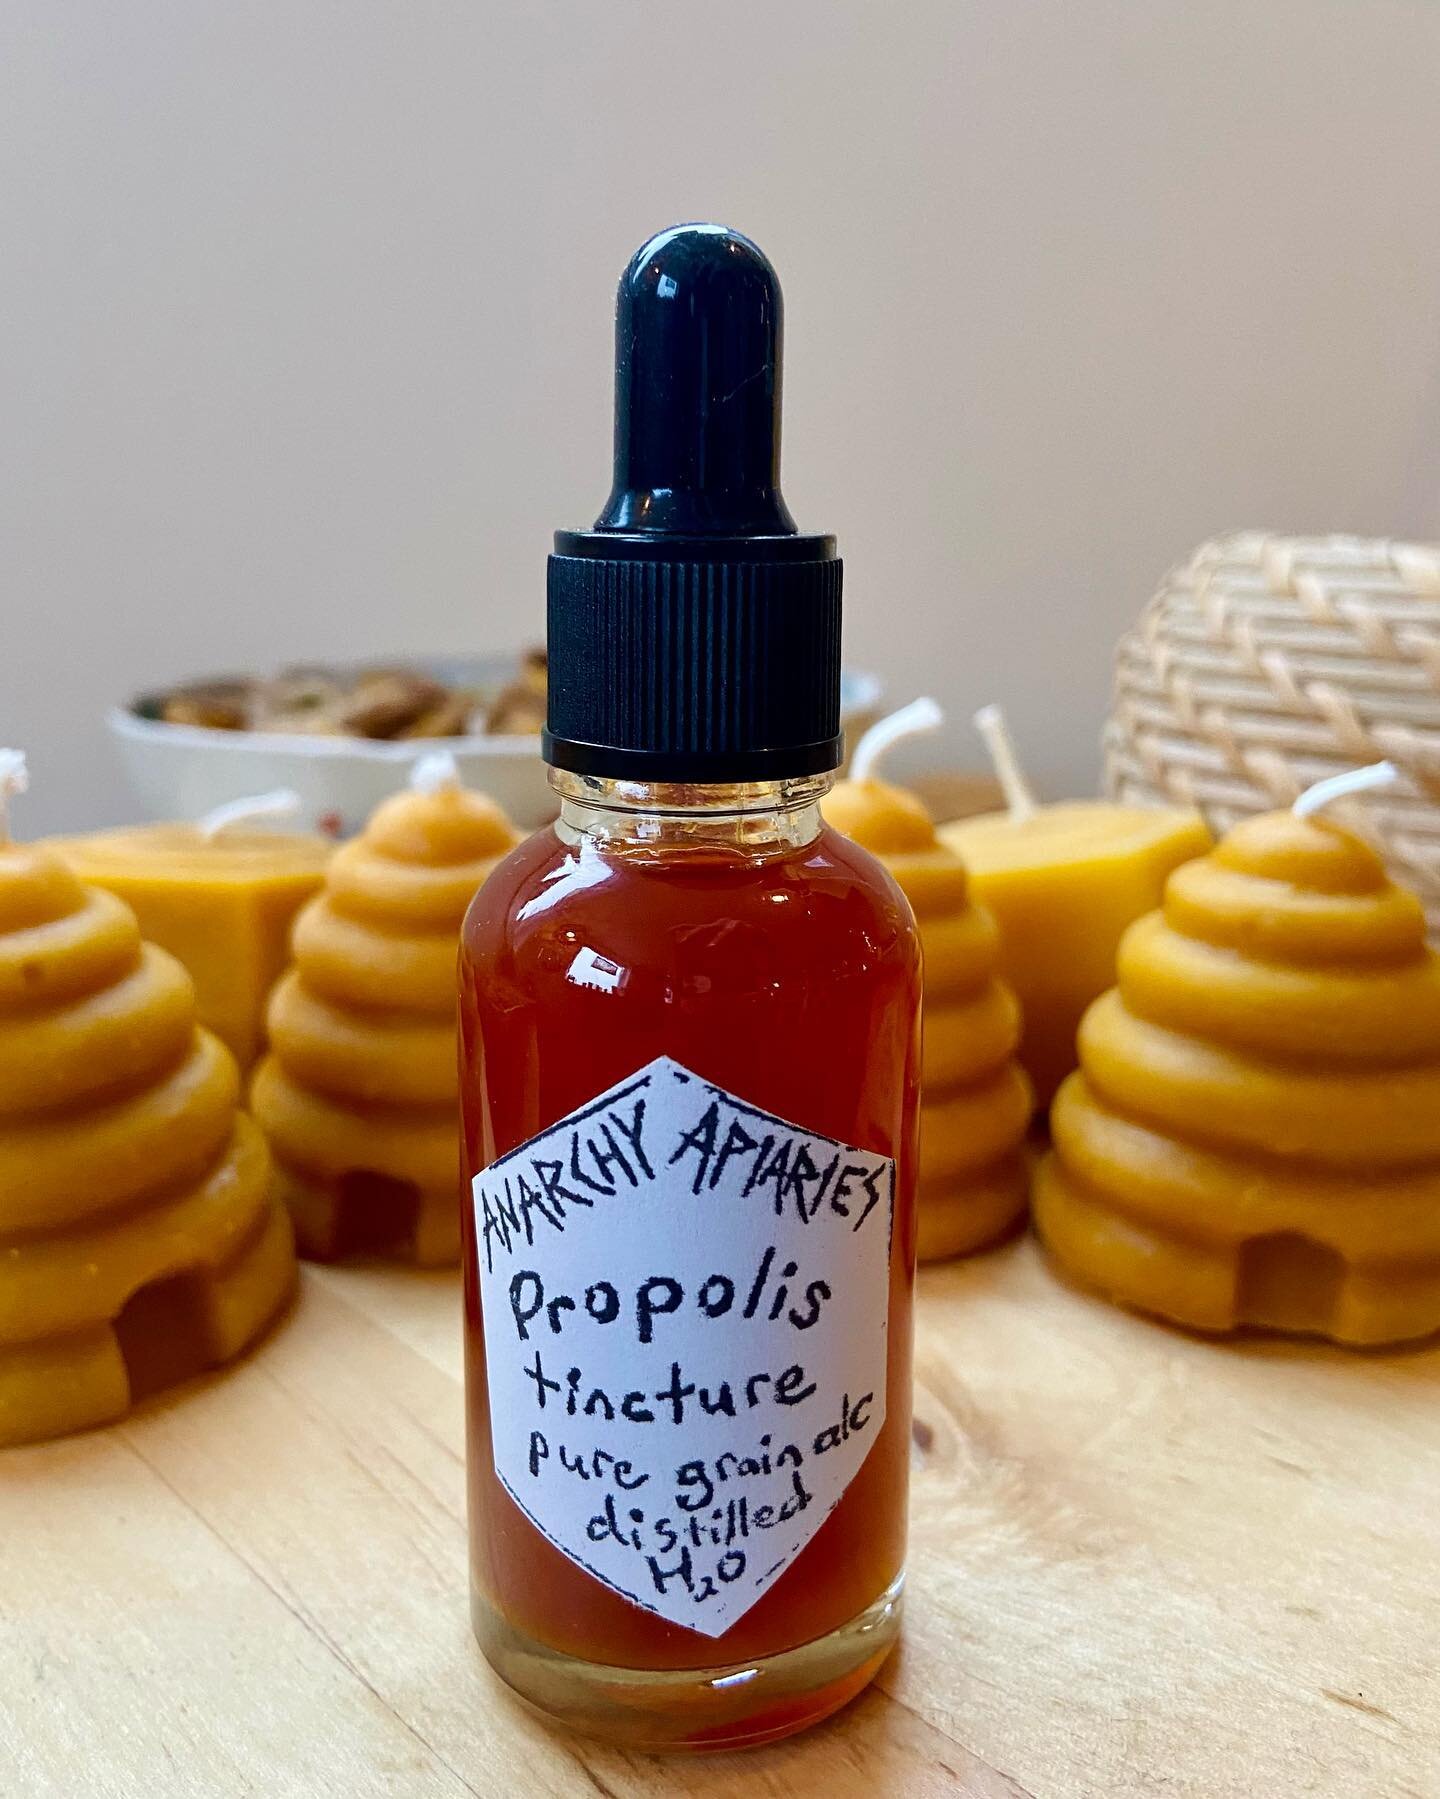 Propolis tincture from Anarchy Apiaries, great for boosting the immune system and is known for its antibacterial properties 🐝 

Open today 11-5 🌧